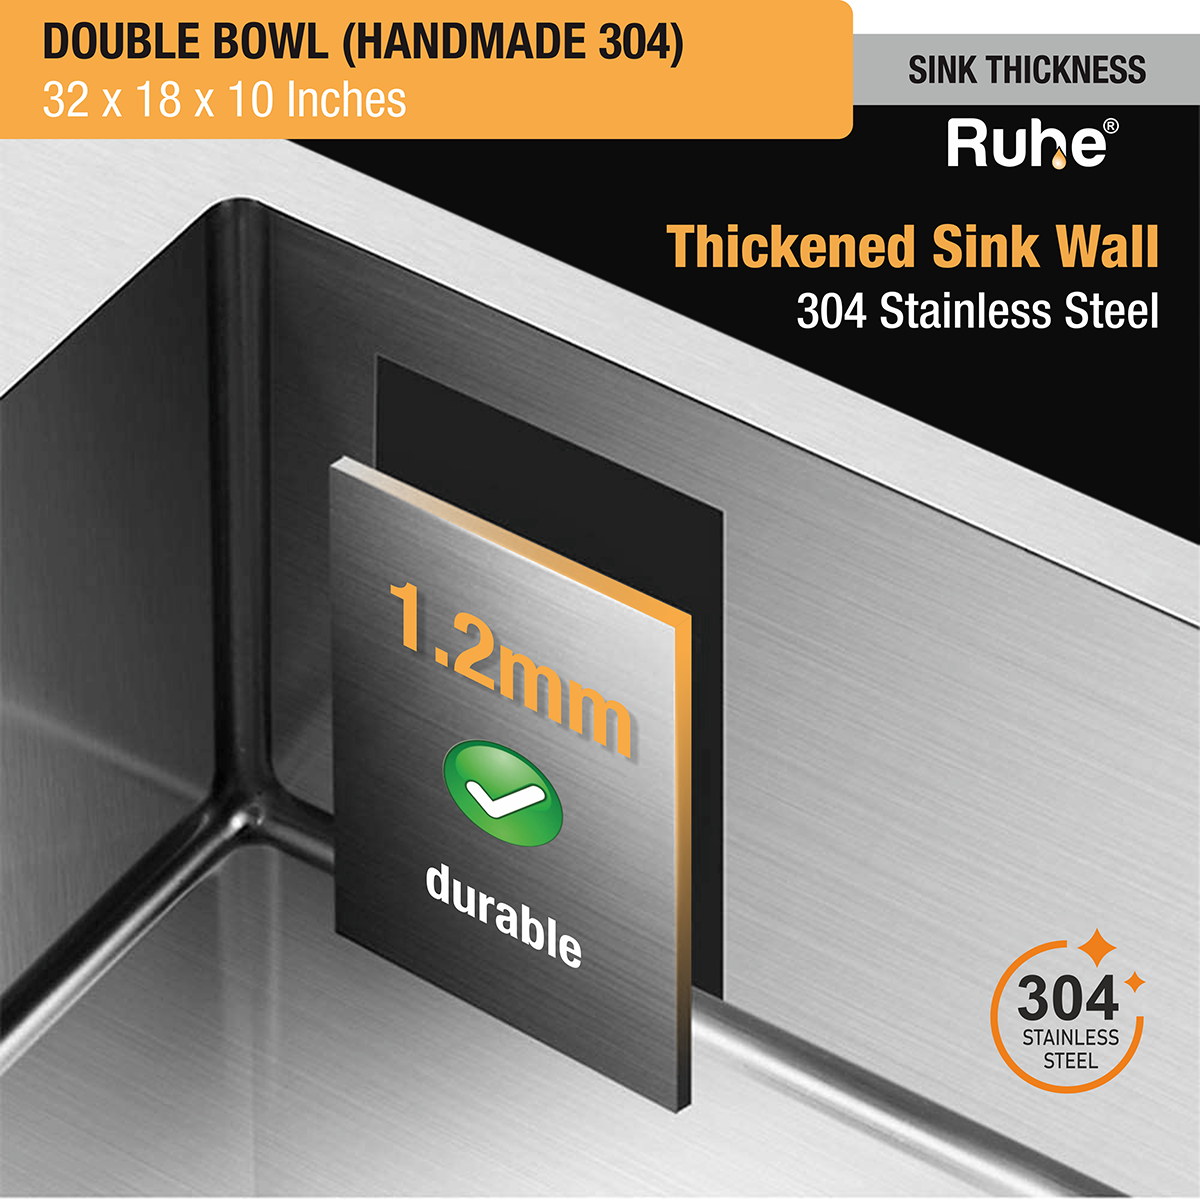 Handmade Double Bowl 304-Grade Kitchen Sink (32 x 18 x 10 Inches) with Tap Hole stainless steel thickness